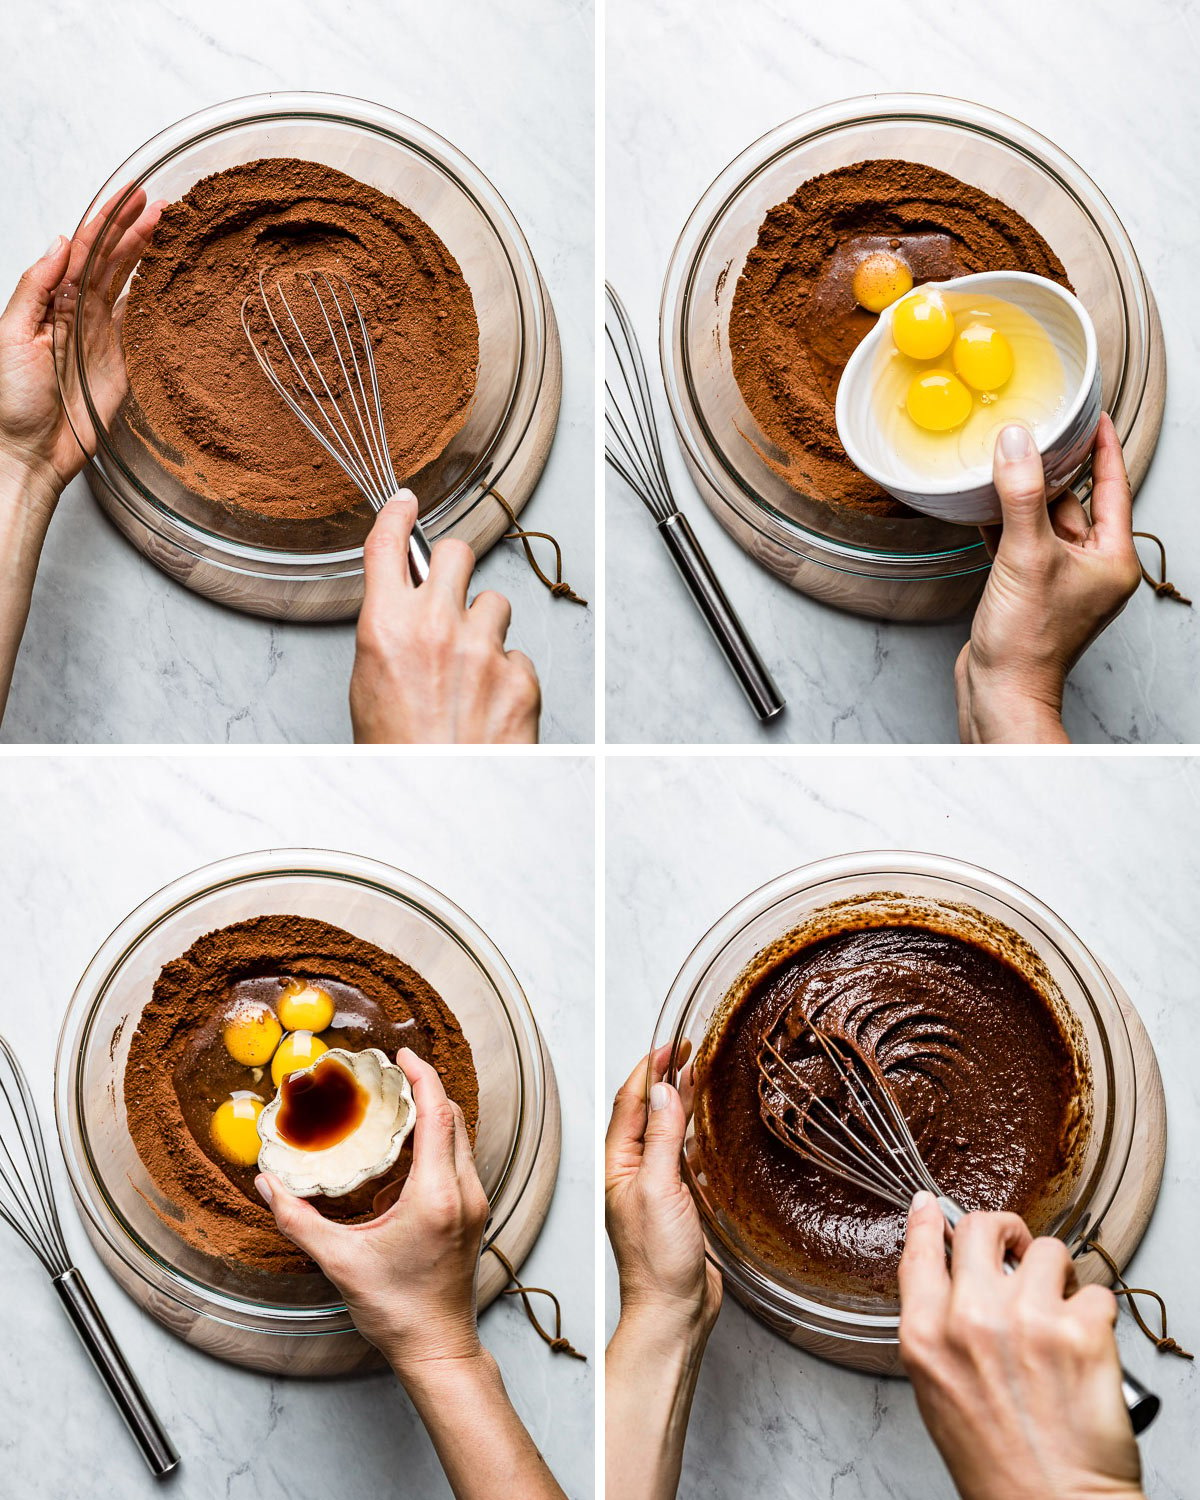 Person showing how to make gluten free chocolate with almond flour in 4 steps